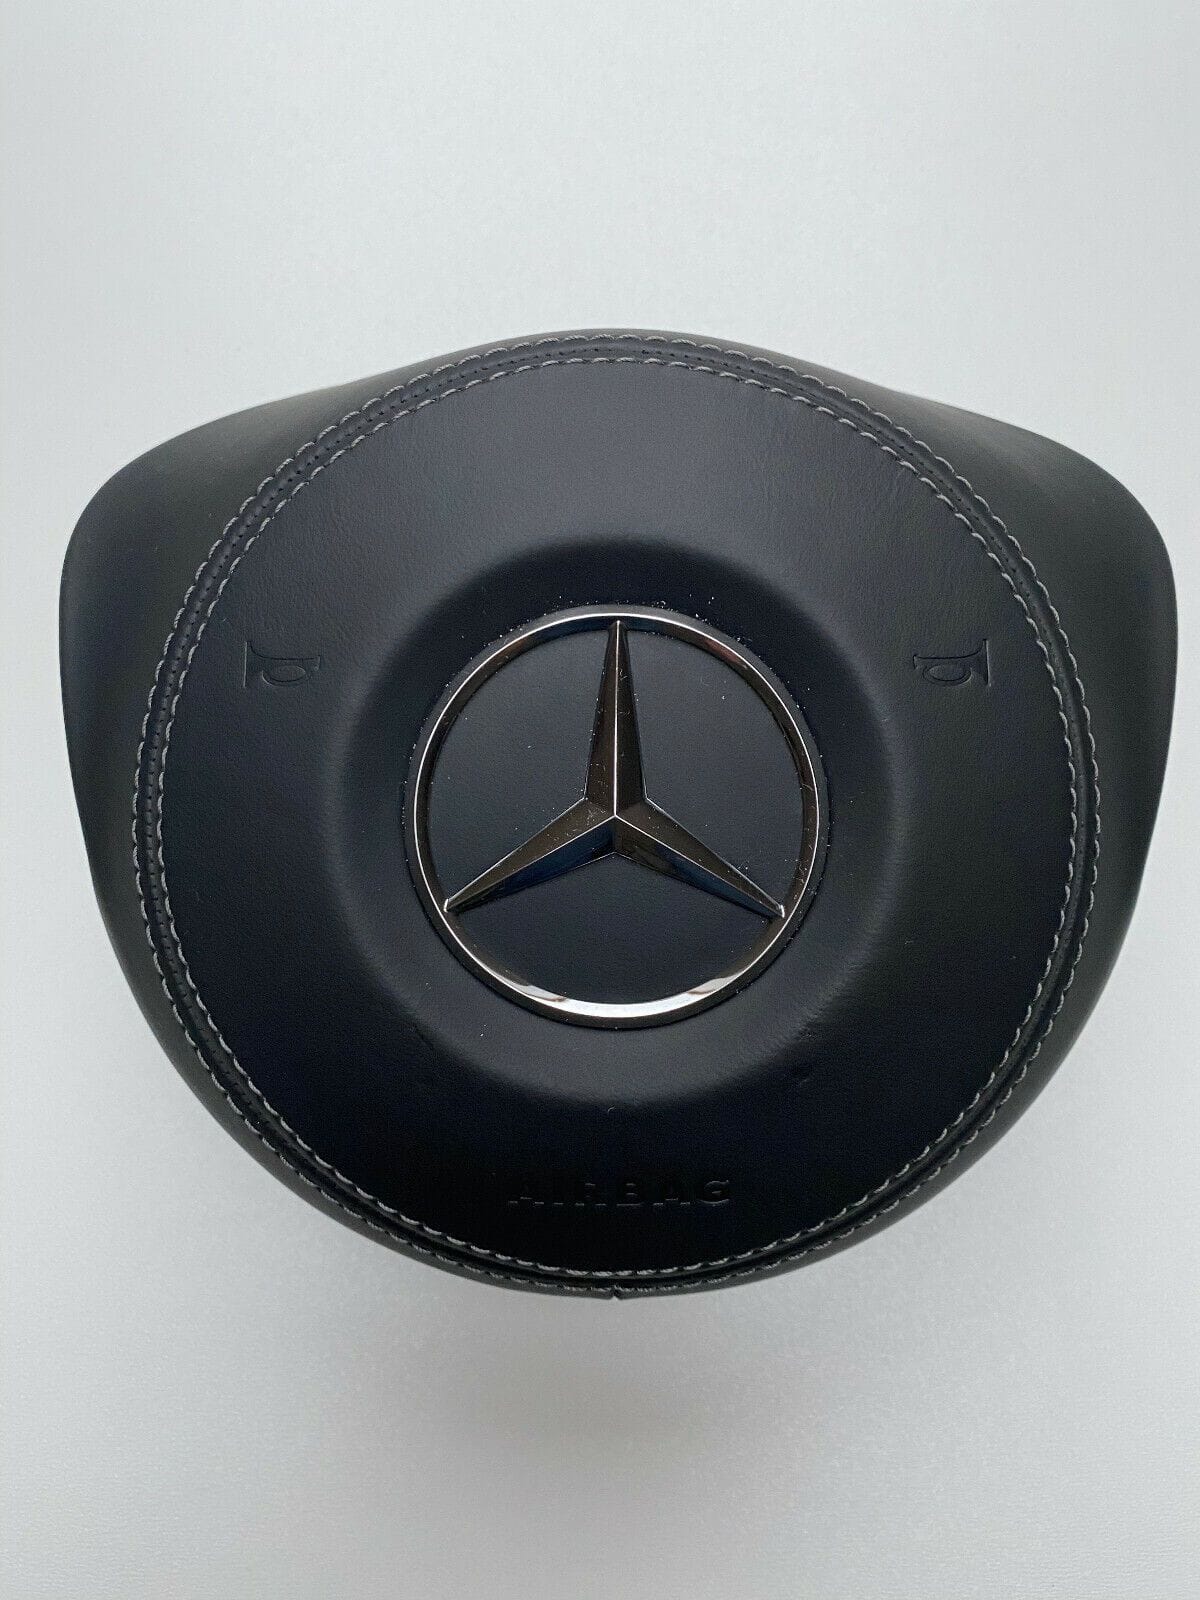 Interior/Upholstery - MERCEDES GLA GLC X253 C253 GLE W166 C292 GLS X166 LEATHER AMG steering wheel Airbag - New - 2015 to 2019 Mercedes-Benz S-Class - Aurora, CO 80016, United States